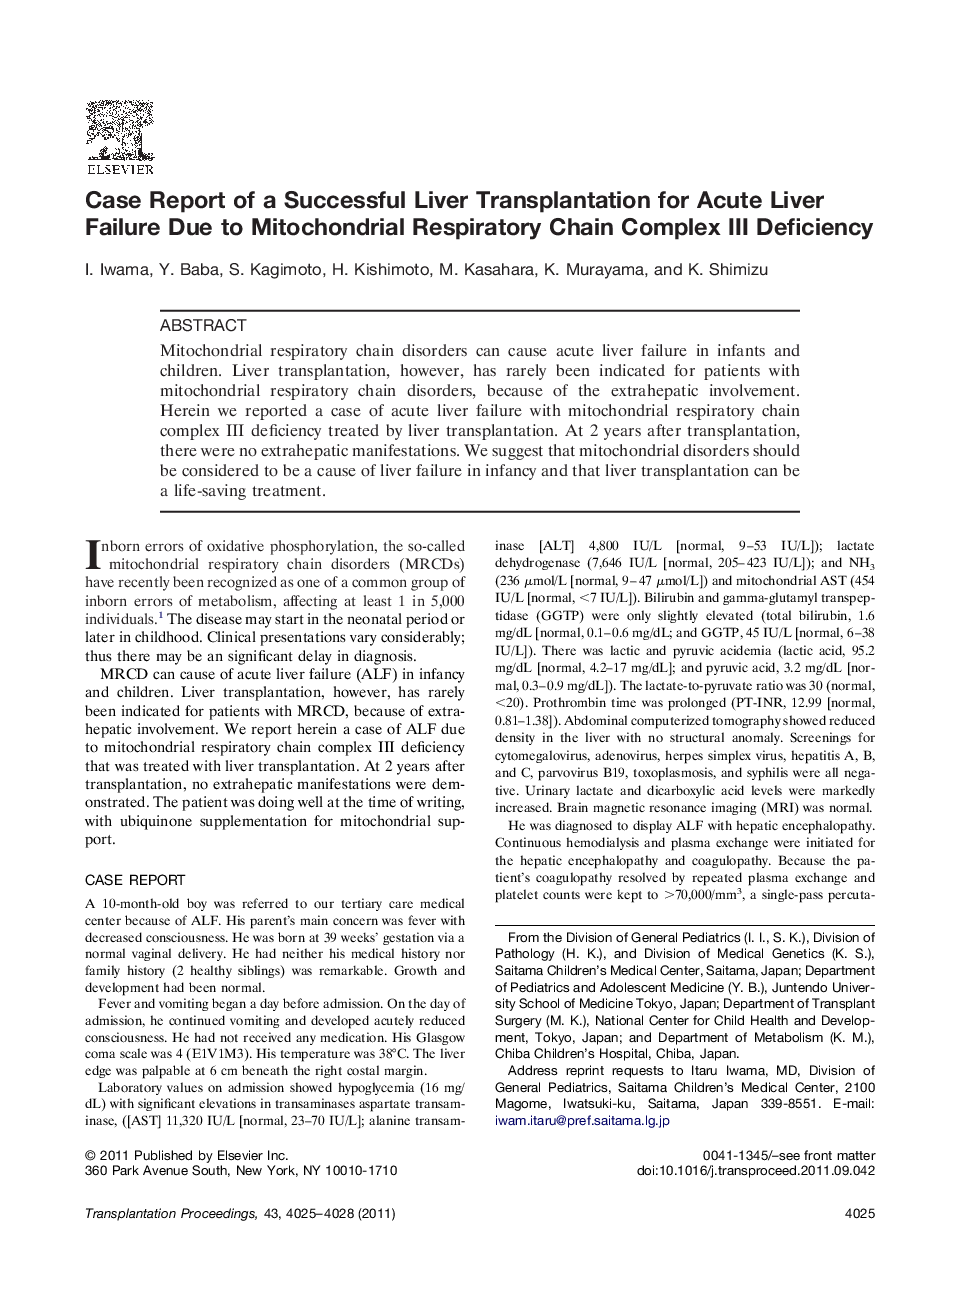 Case reportLiver transplantationCase Report of a Successful Liver Transplantation for Acute Liver Failure Due to Mitochondrial Respiratory Chain Complex III Deficiency